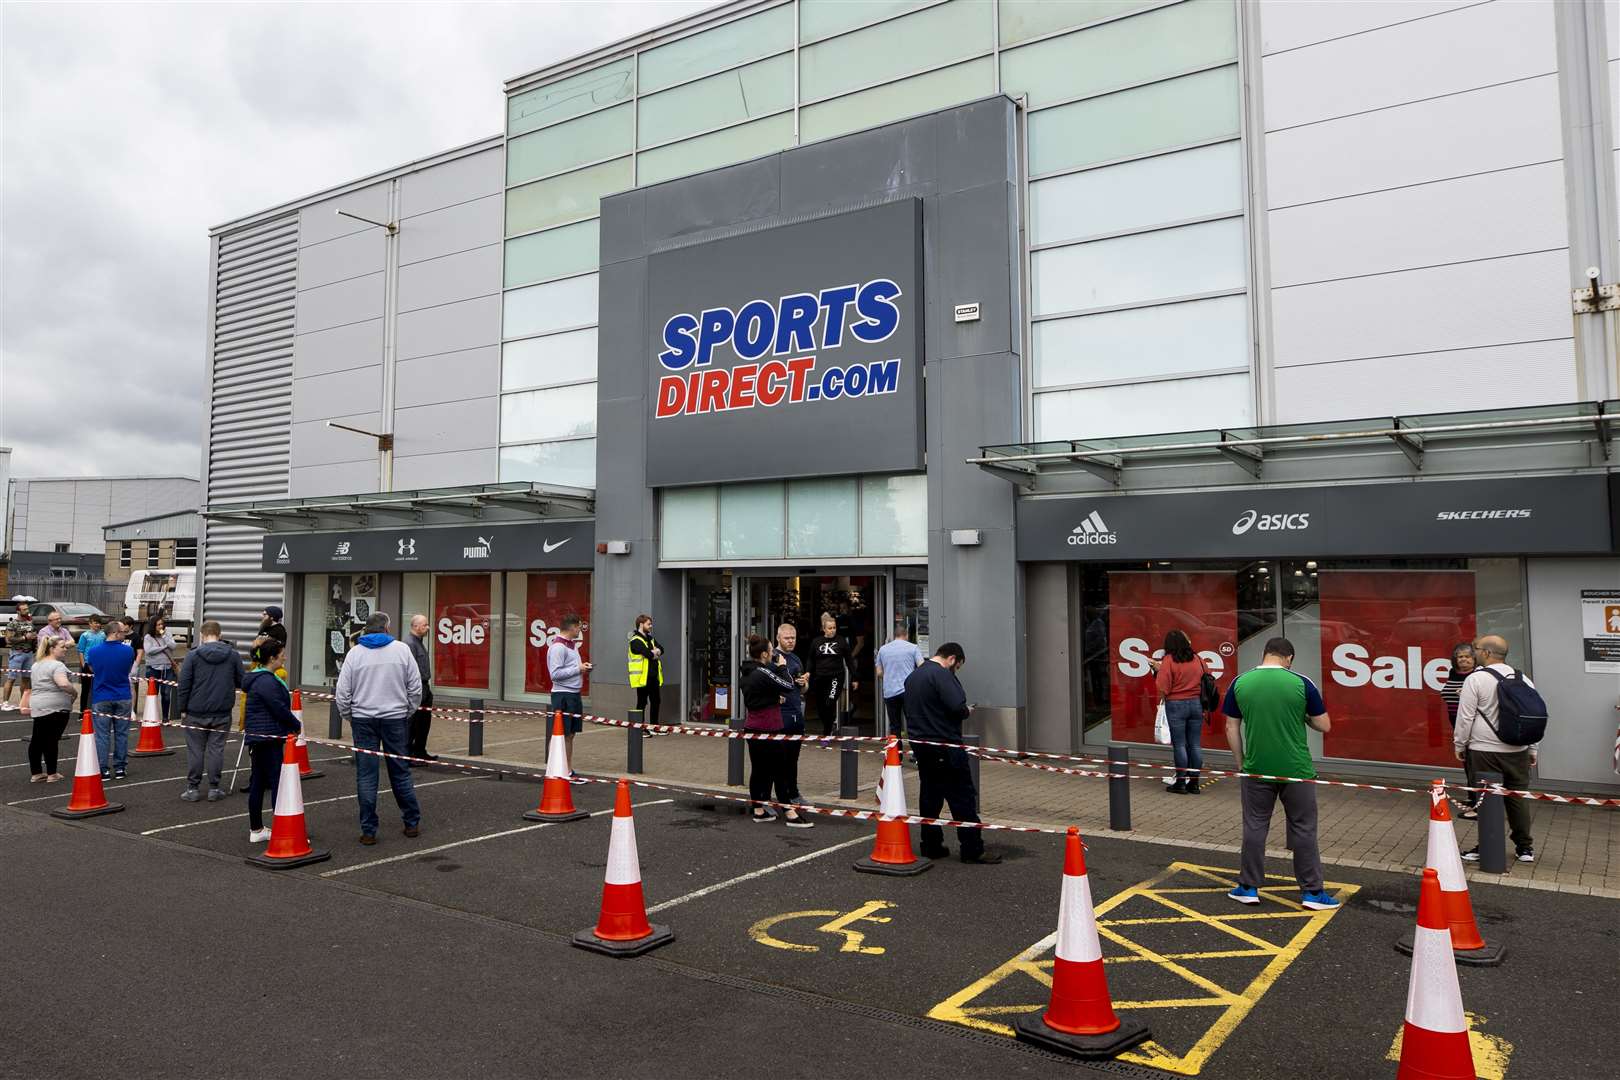 Shoppers at a retail park in Belfast queue to enter Sports Direct after the store reopened (Liam McBurney/PA)